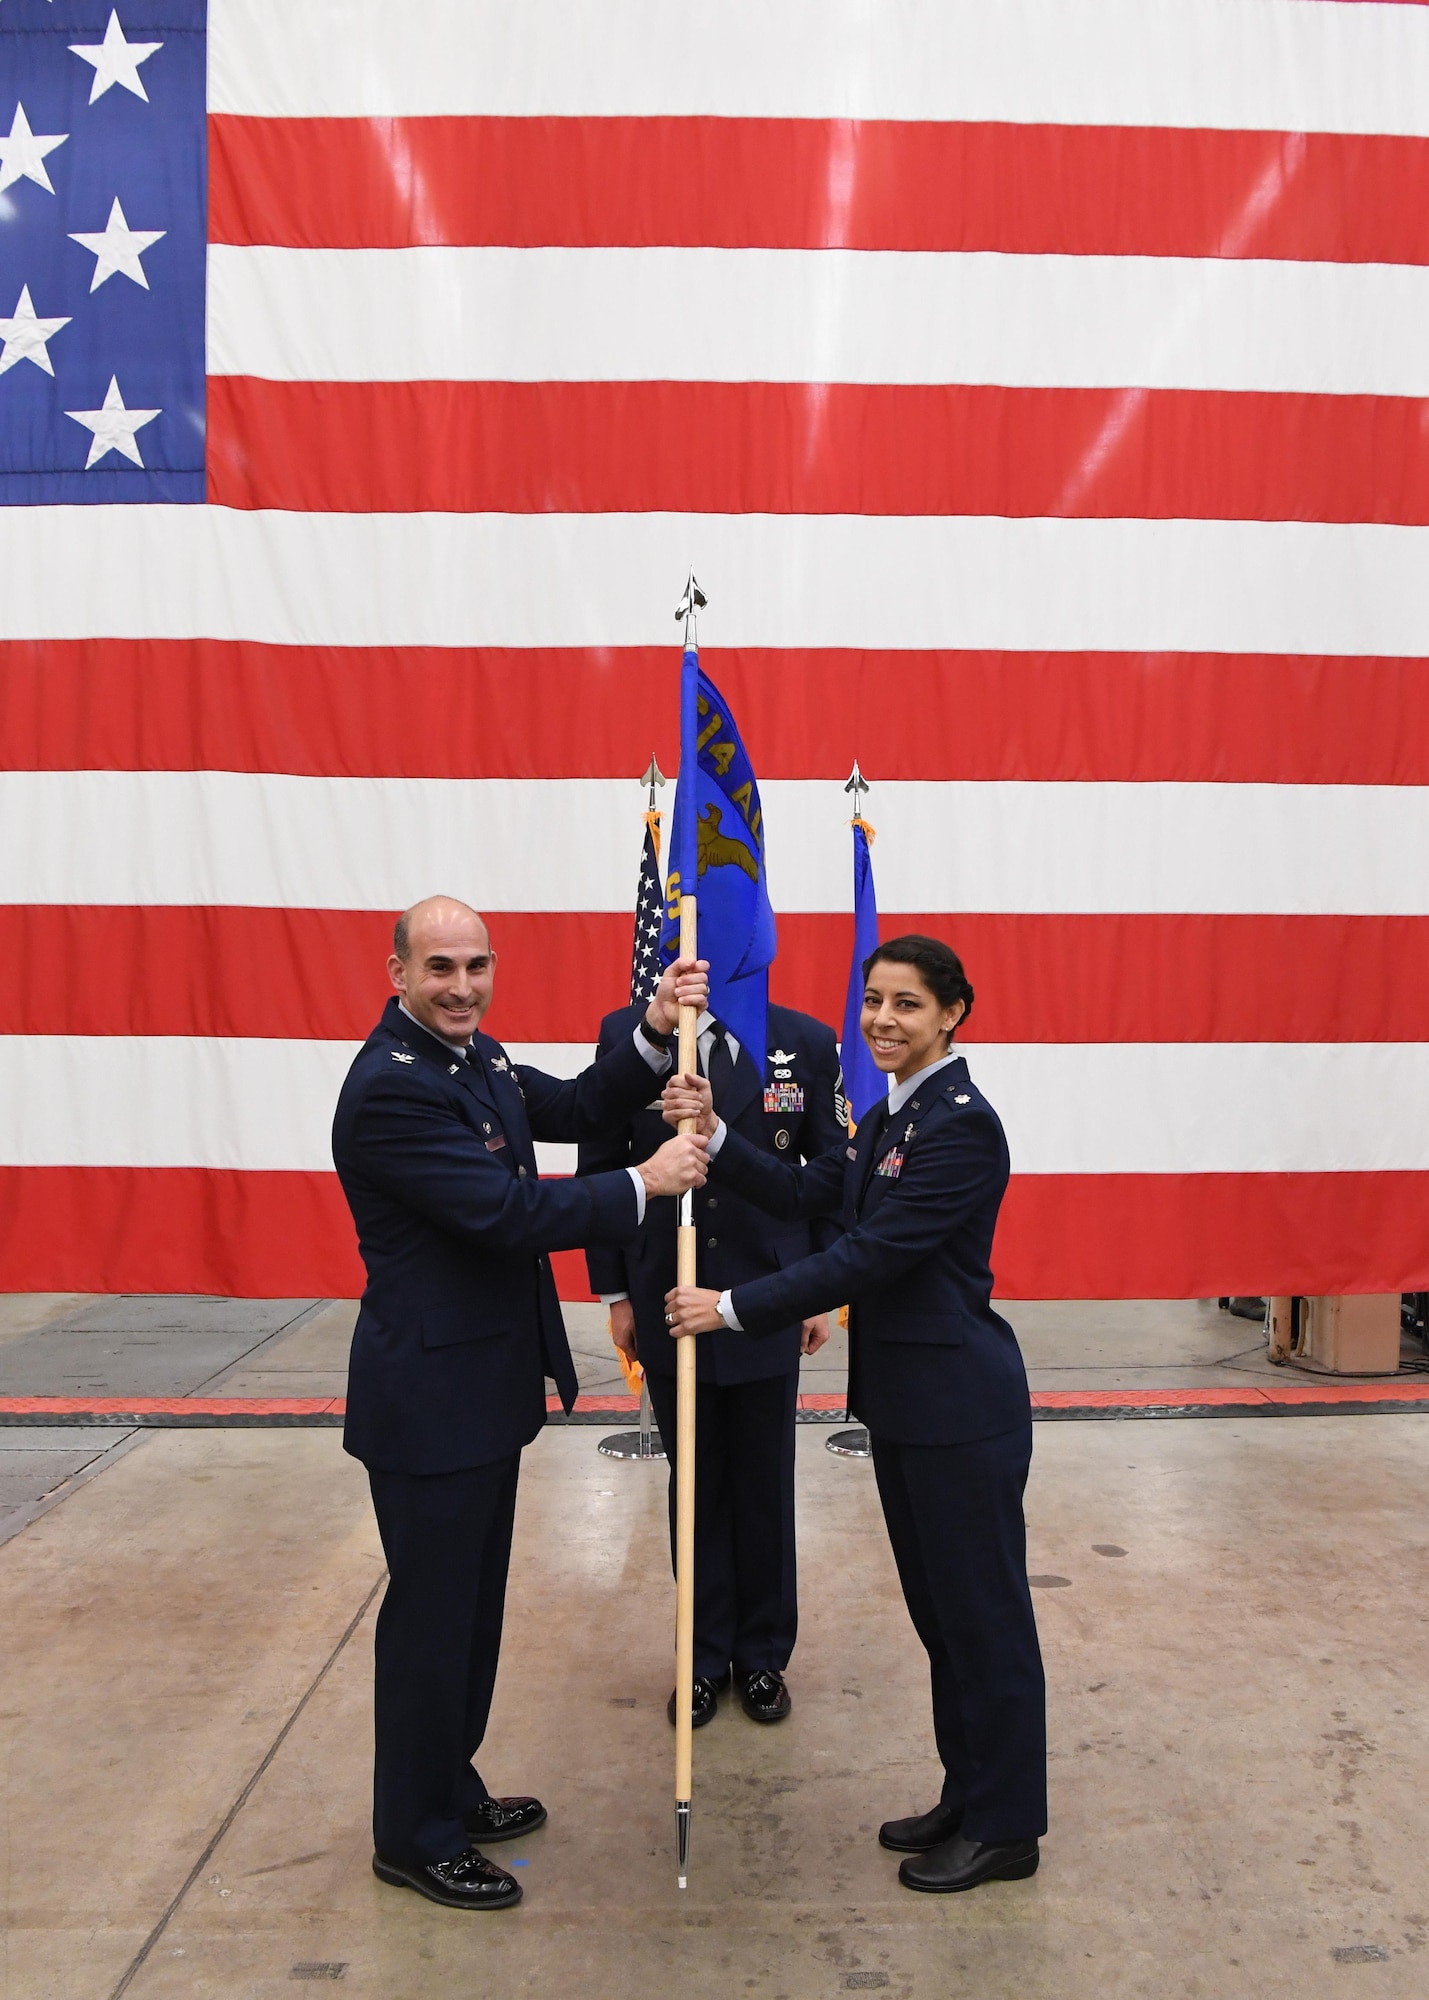 Col. Michael Manor, commander, 614th Air Operations Center and Joint Space Operations Center Director, passes the guidon to Lt. Col. Nicole Petrucci, commander, 614th Combat Training Squadron, during an activation ceremony Dec. 16, 2016 at Vandenberg Air Force Base, California.  As a new squadron under the 614th AOC, the 614th CTS will provide advanced training enabling the implementation and sustainment of Space Training Transformation and Space Mission Force initiatives and constructs across the unit. (U.S. Air Force photo by Capt. Nicholas Mercurio/Released)